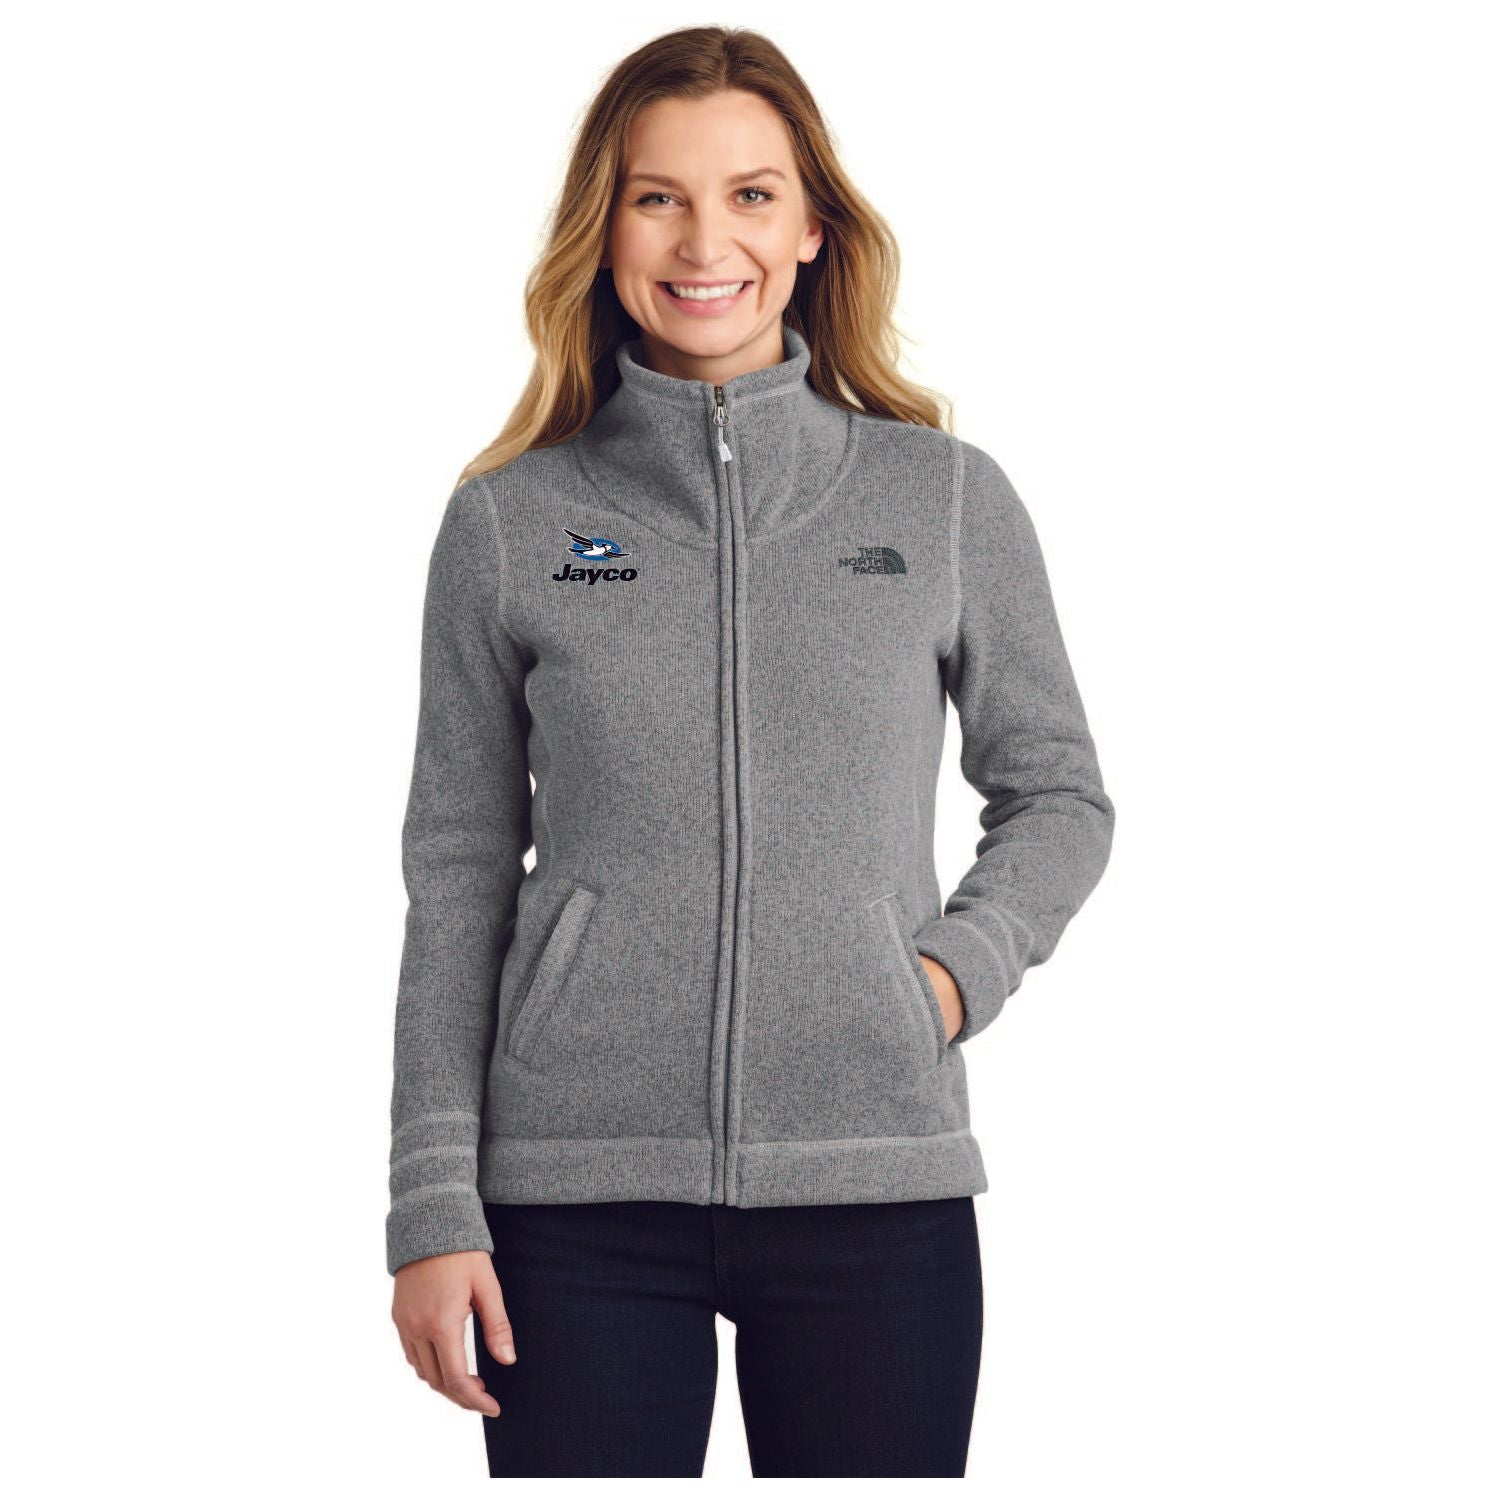 The North Face® Ladies Sweater Fleece Jacket - NF0A3LH8 – JaycoStore